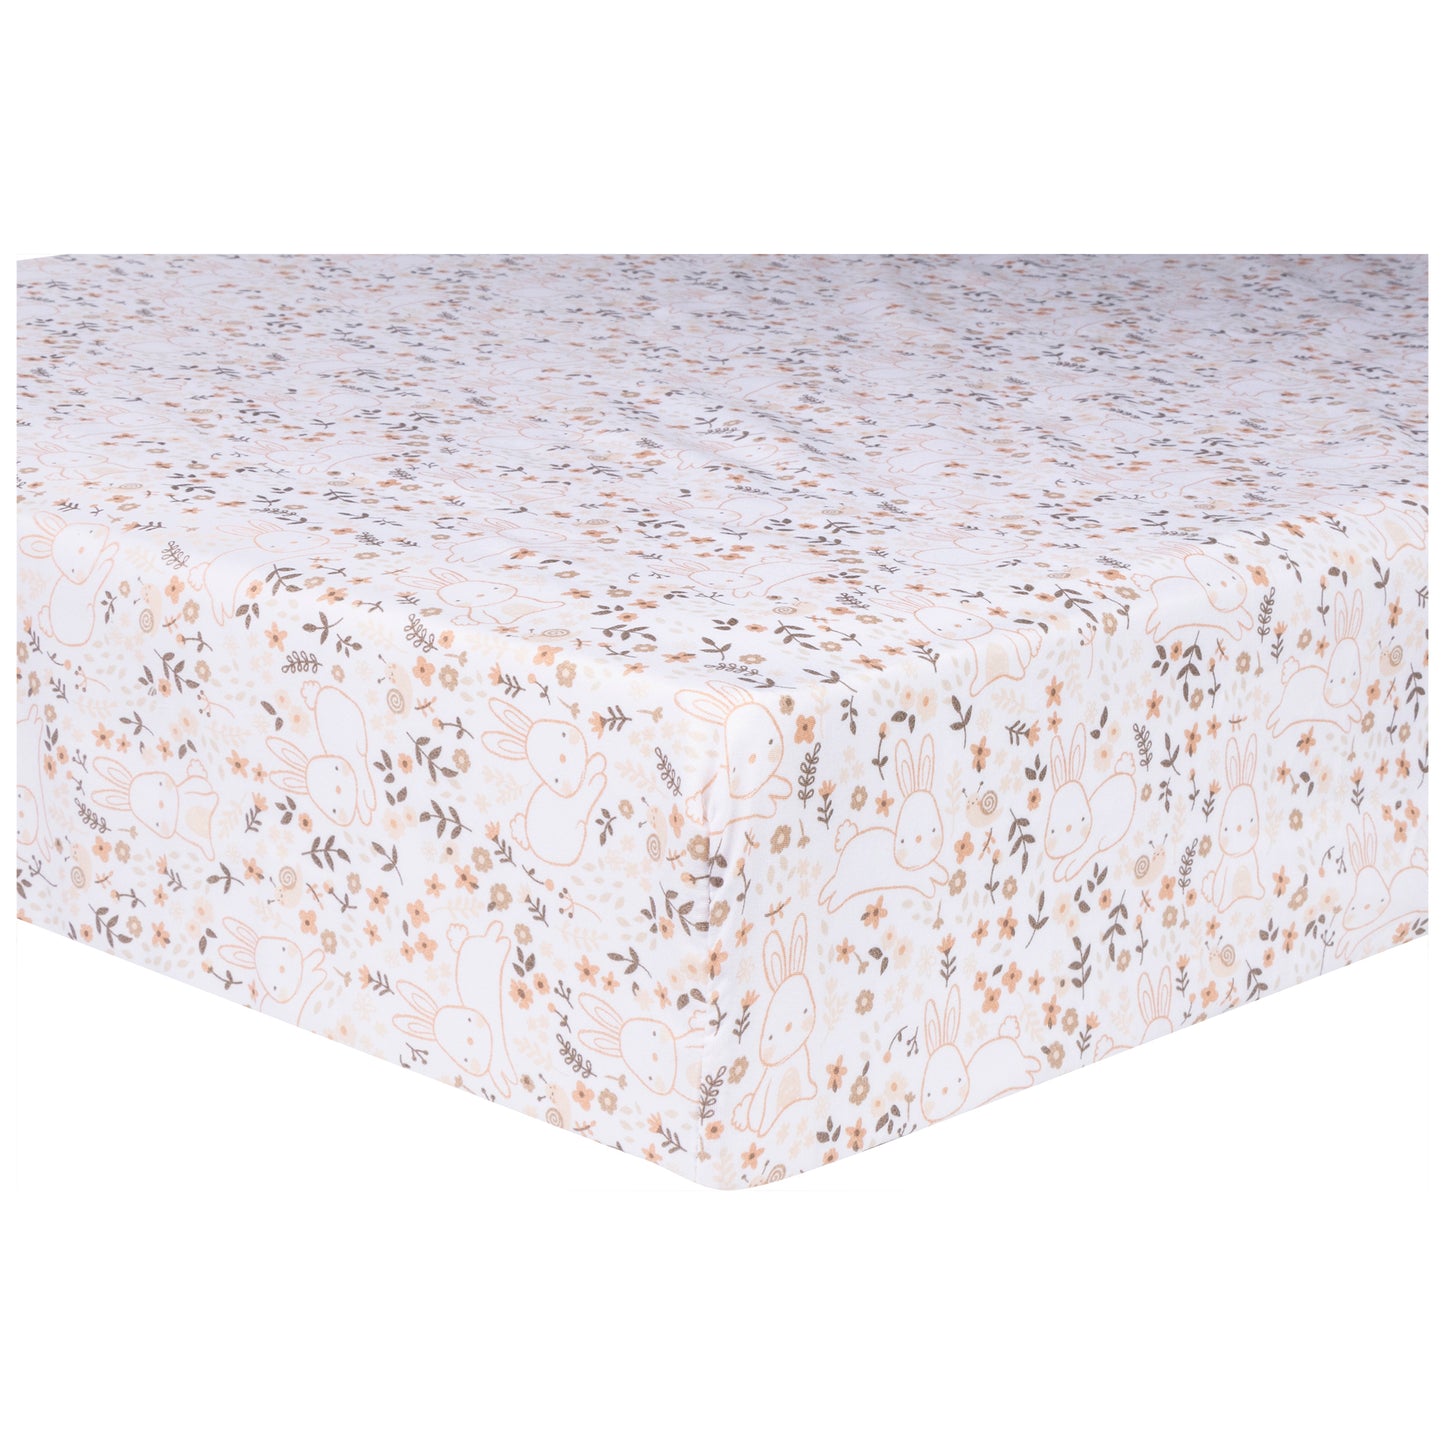 Fitted crib sheet fits standard crib mattress 28 in x 52 in with 8-inch-deep pockets and is fully elasticized for a secure fit. Crib sheet features sweet little cottontail bunnies surrounded by flowers in soft pink, rose, opal gray and mushroom.